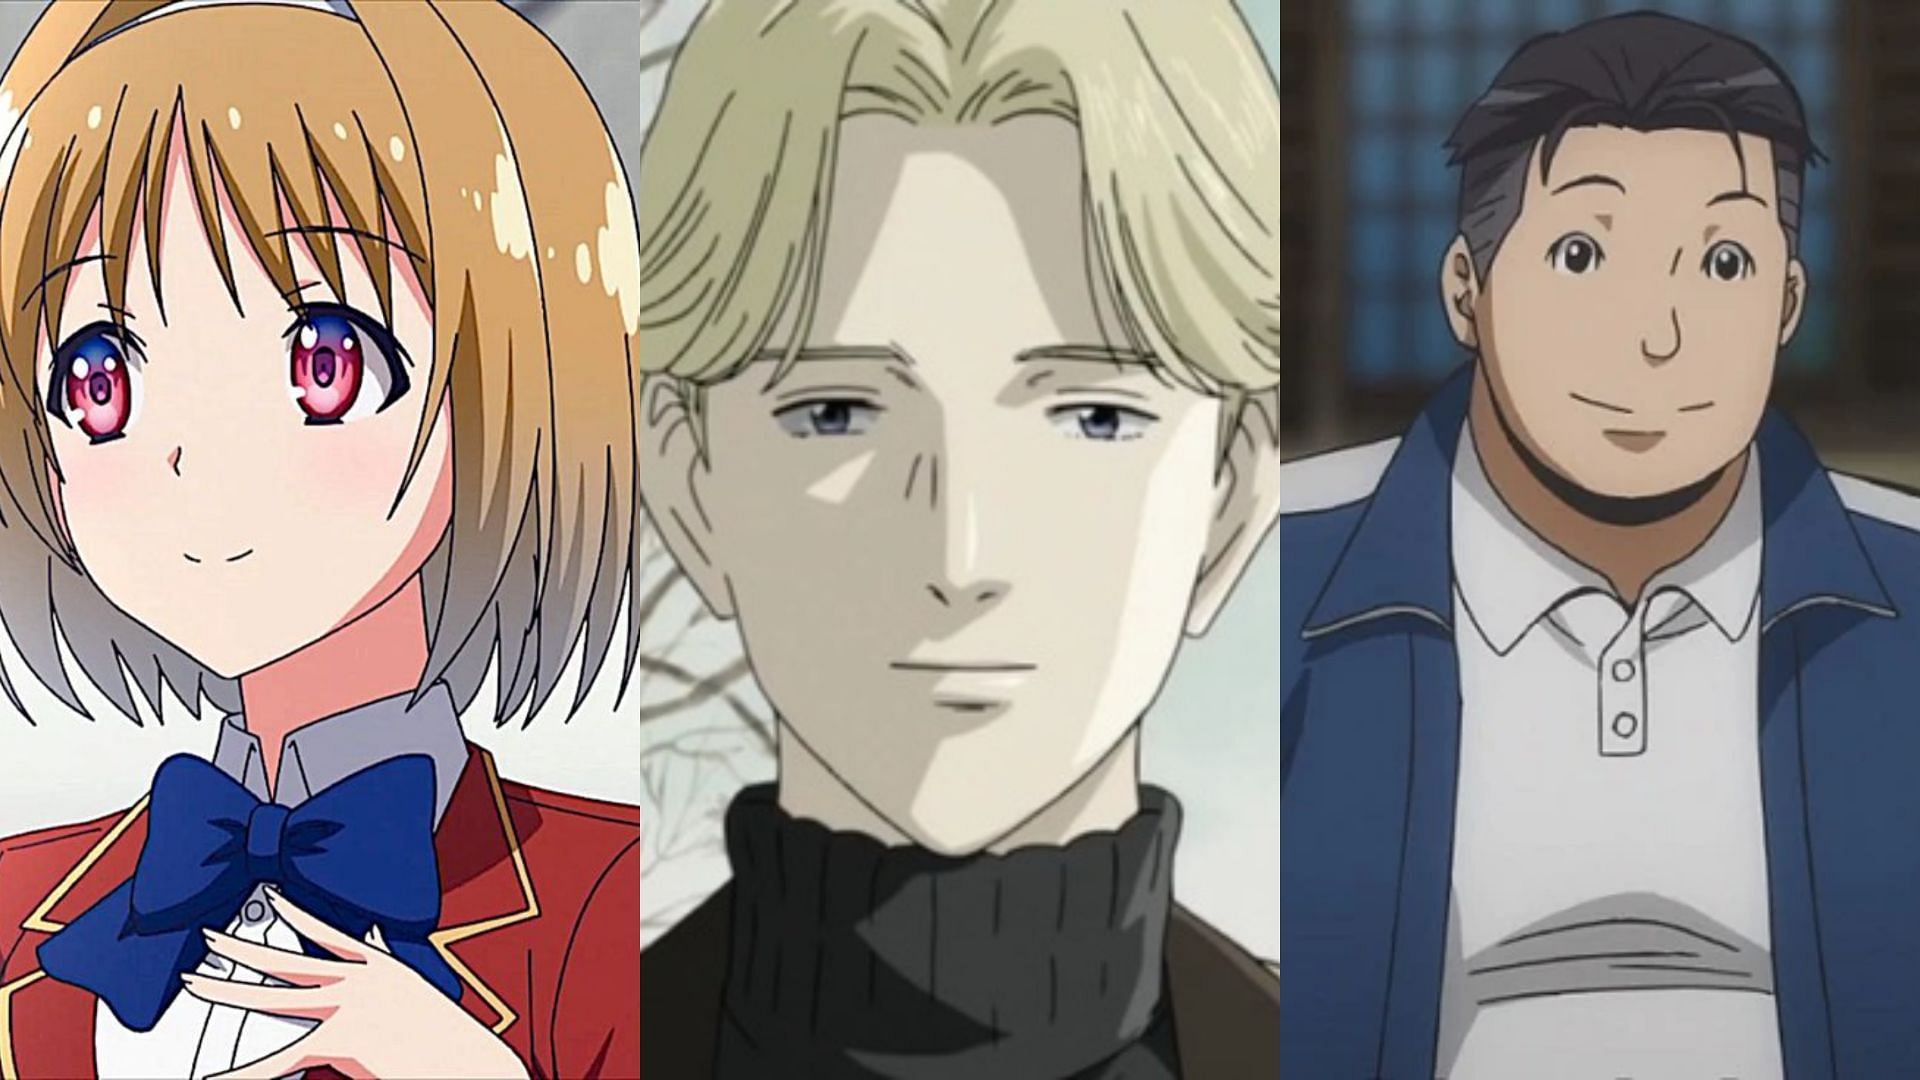 10 anime characters who pretend to be kind but are evil